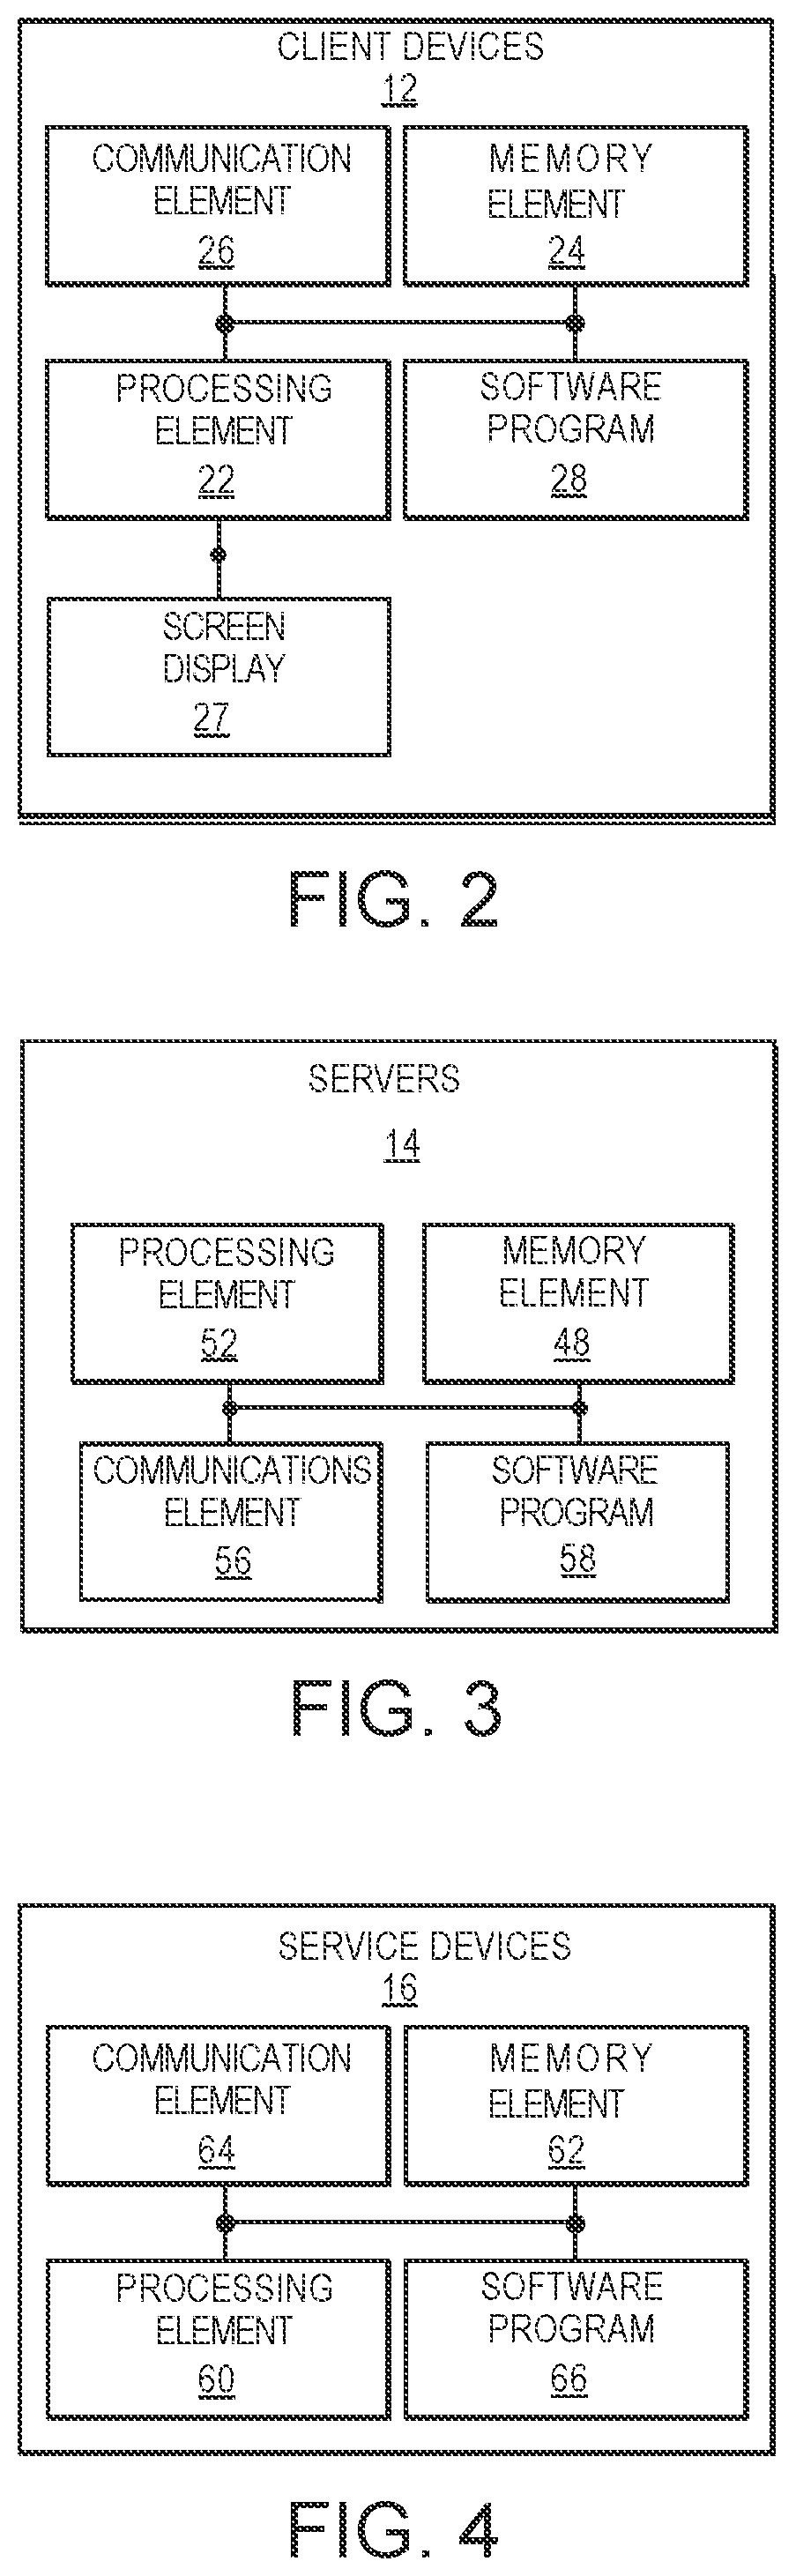 Computer-implemented methods, systems comprising computer-readable media, and electronic devices for autonomous cybersecurity within a network computing environment